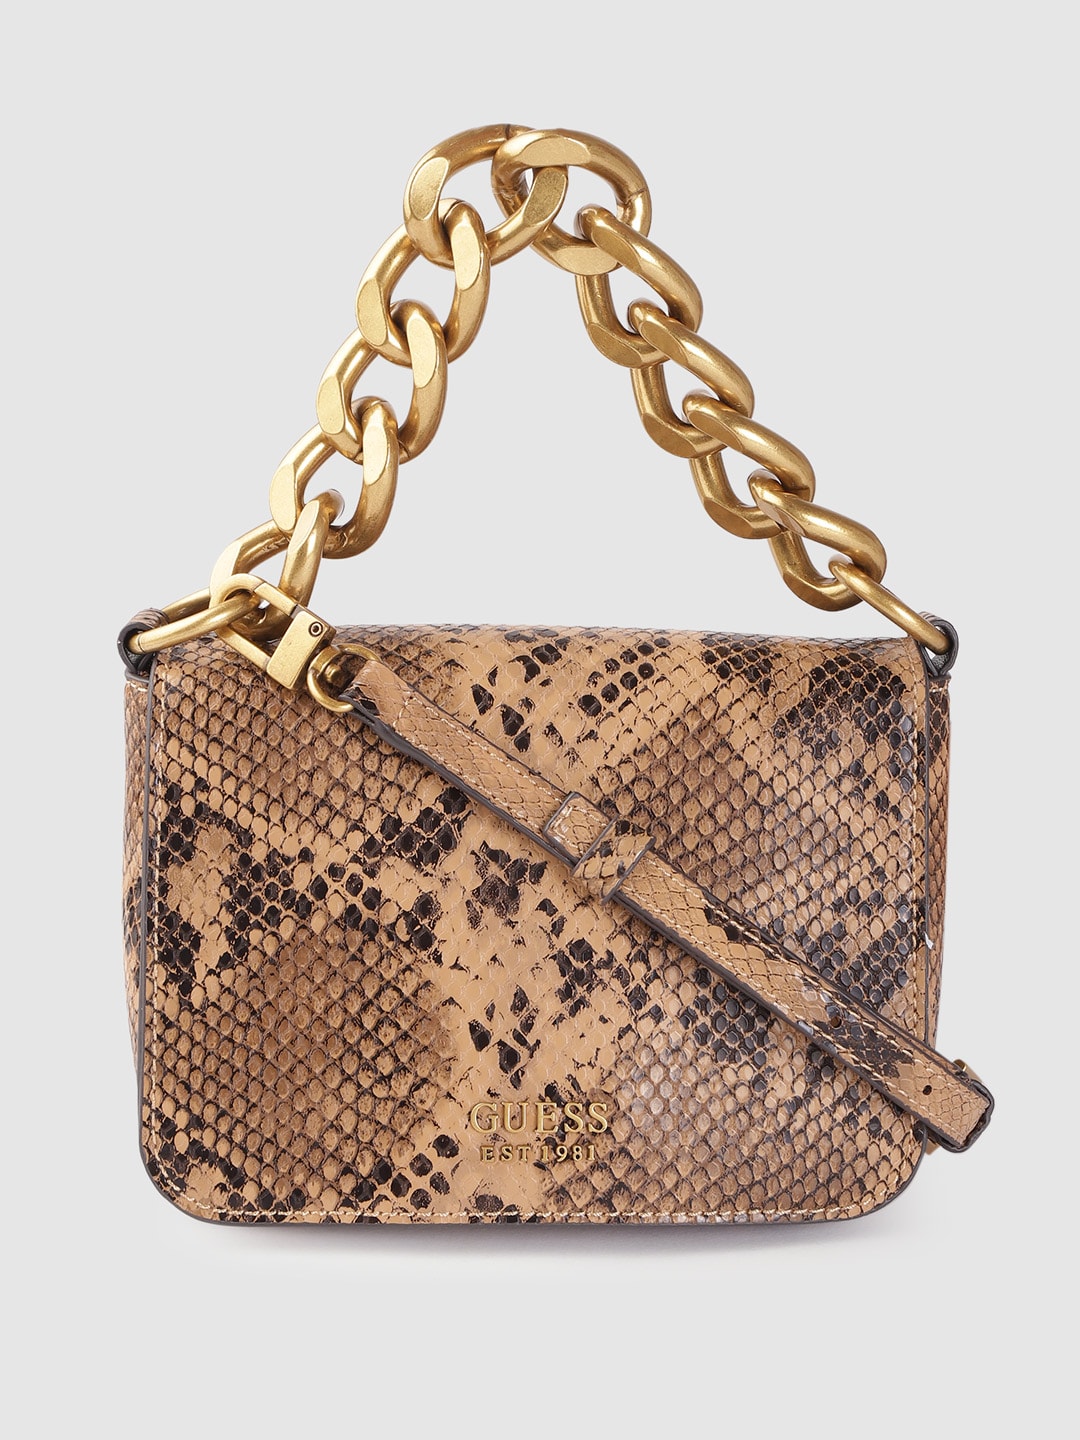 GUESS Beige & Coffee Brown Snakeskin Textured Handheld Bag with Detachable Sling Strap Price in India